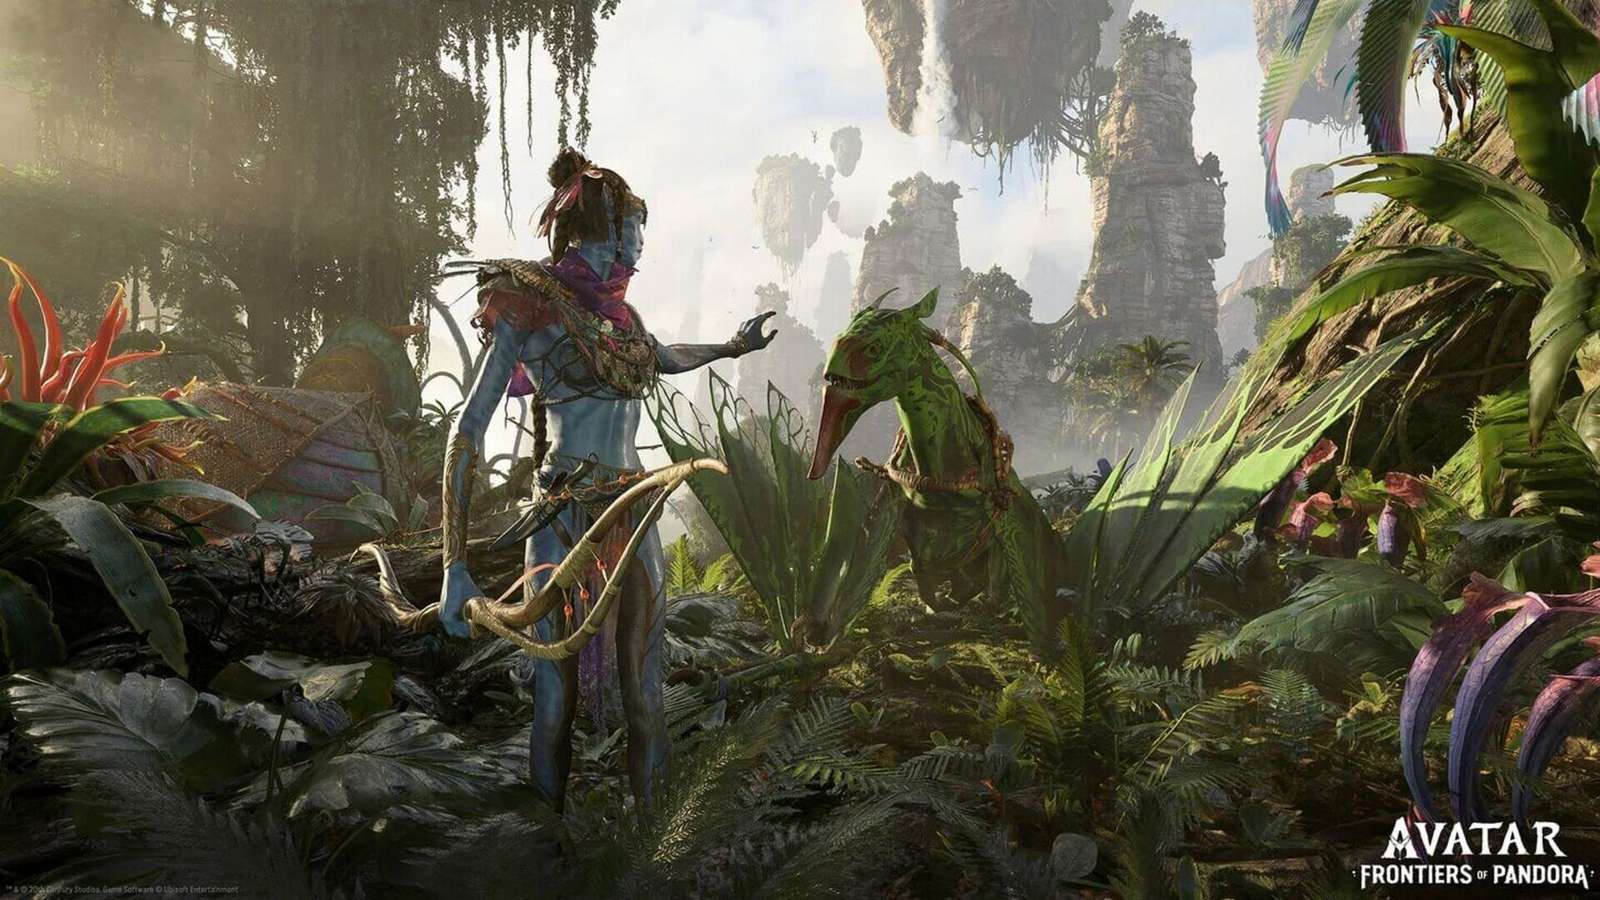 A Na'vi warrior wielding a bow and arrow in Avatar Frontiers of Pandora